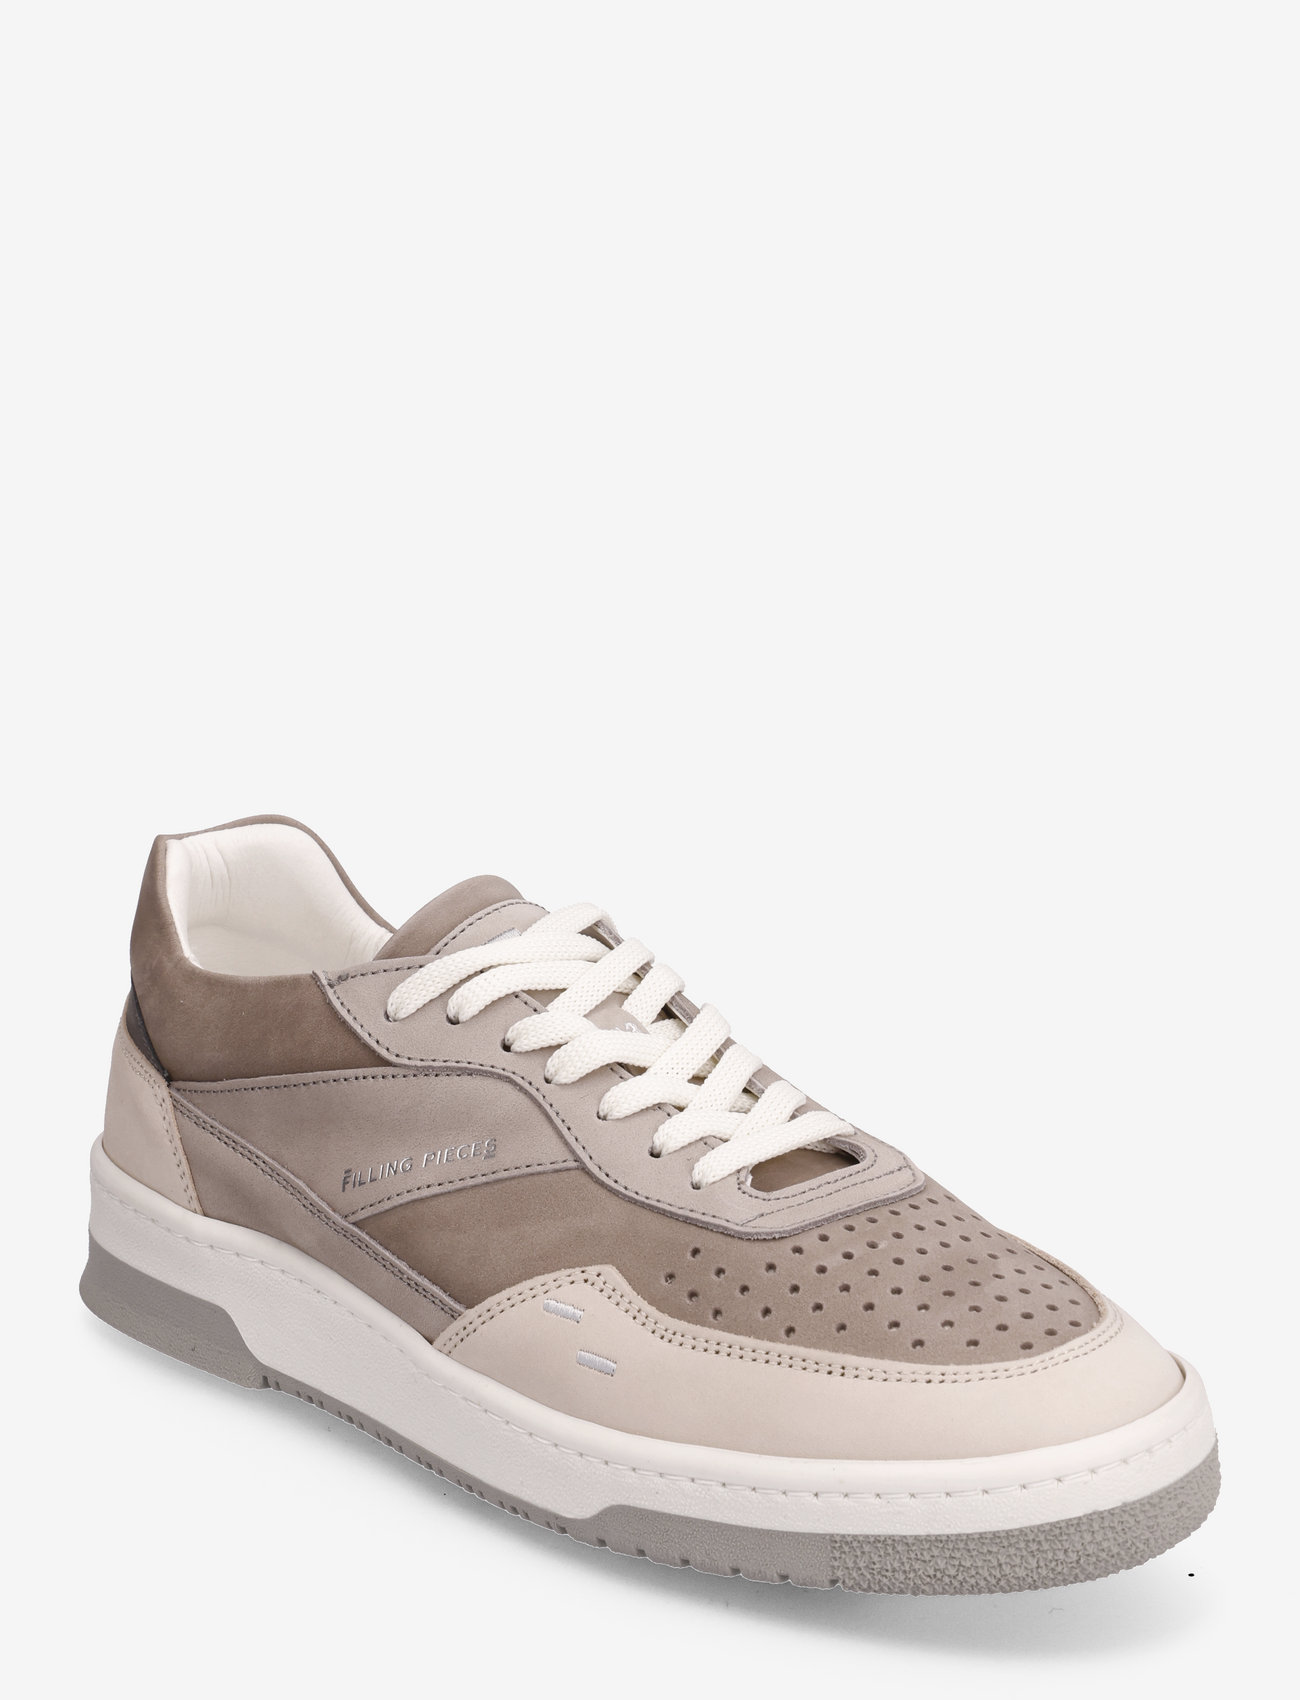 Filling Pieces - Ace Spin Light Grey - low tops - taupe - 0